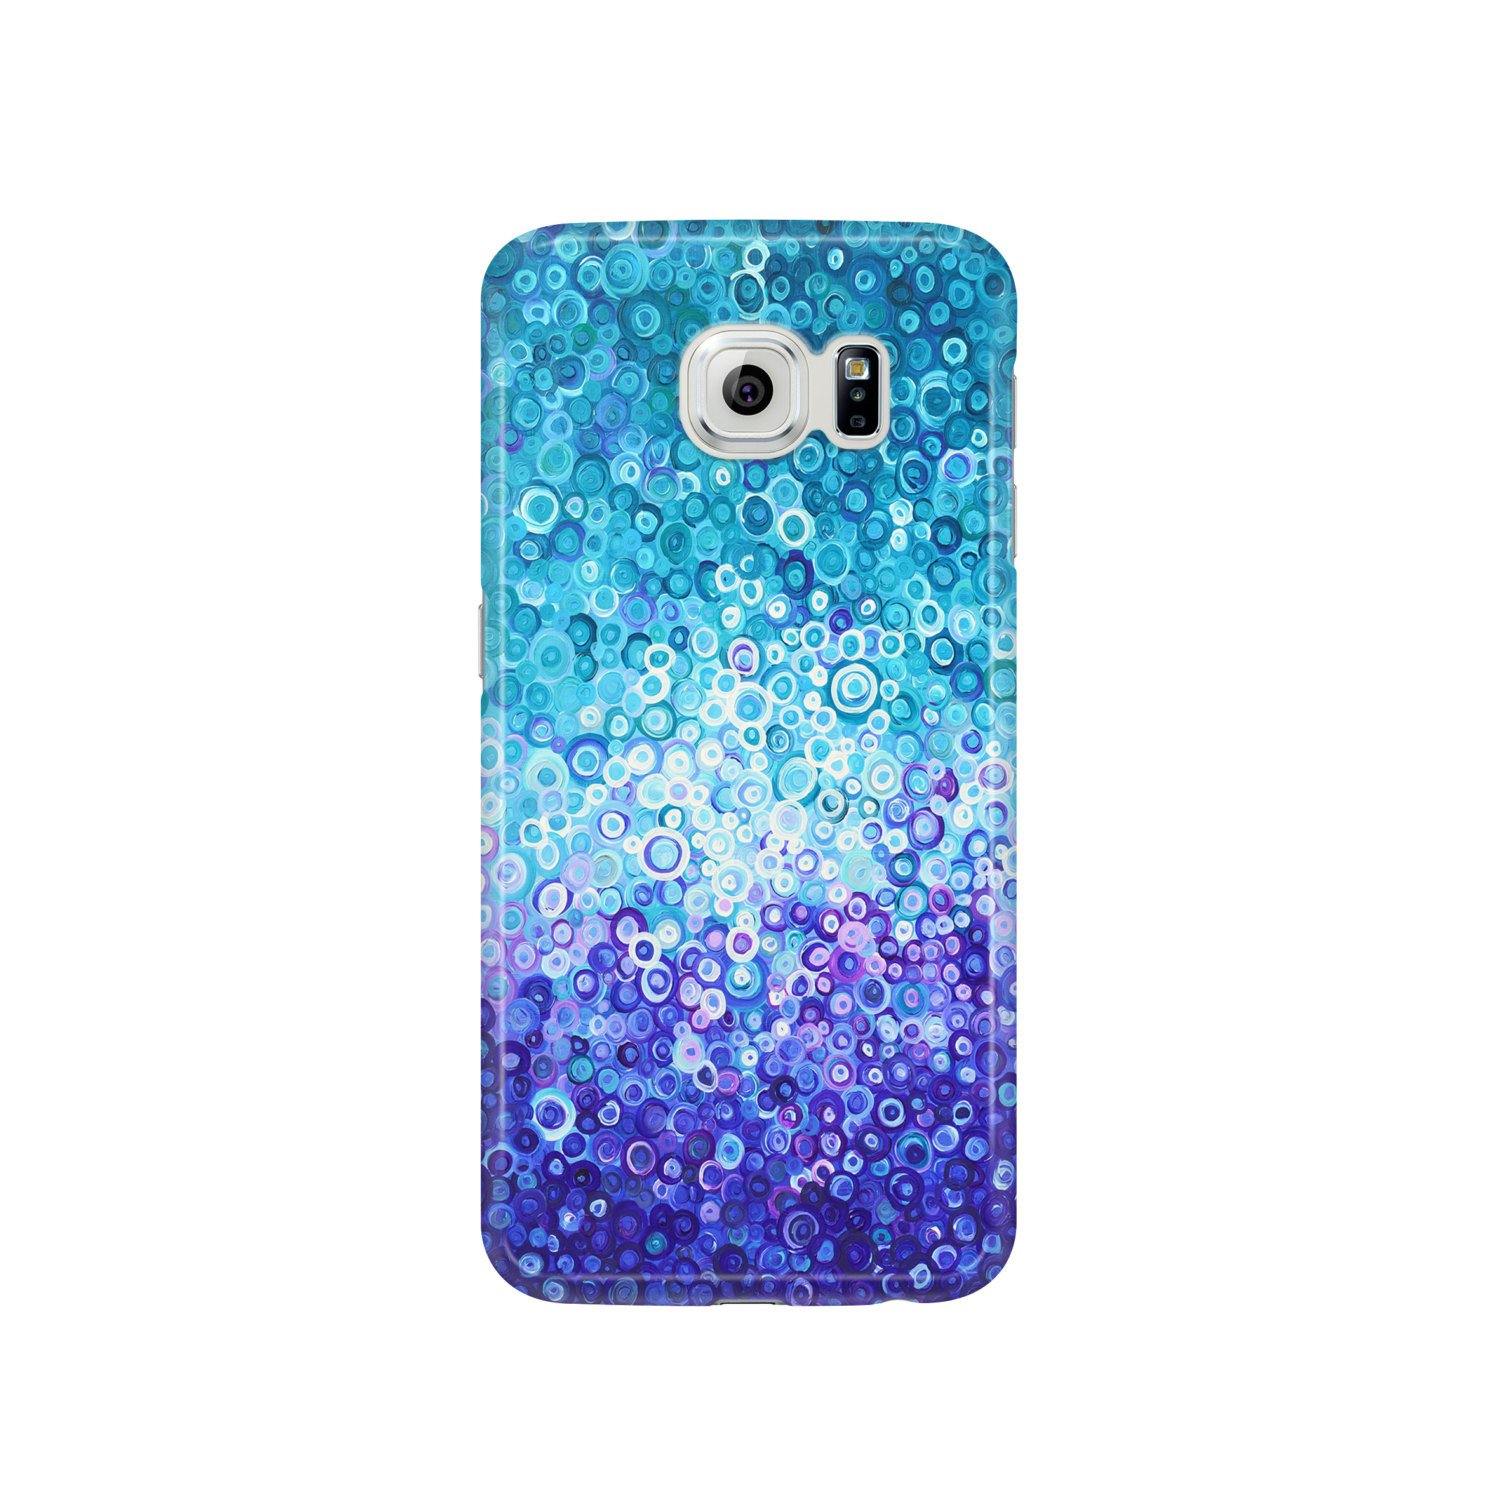 Blue & White Samsung Case - Louise Mead